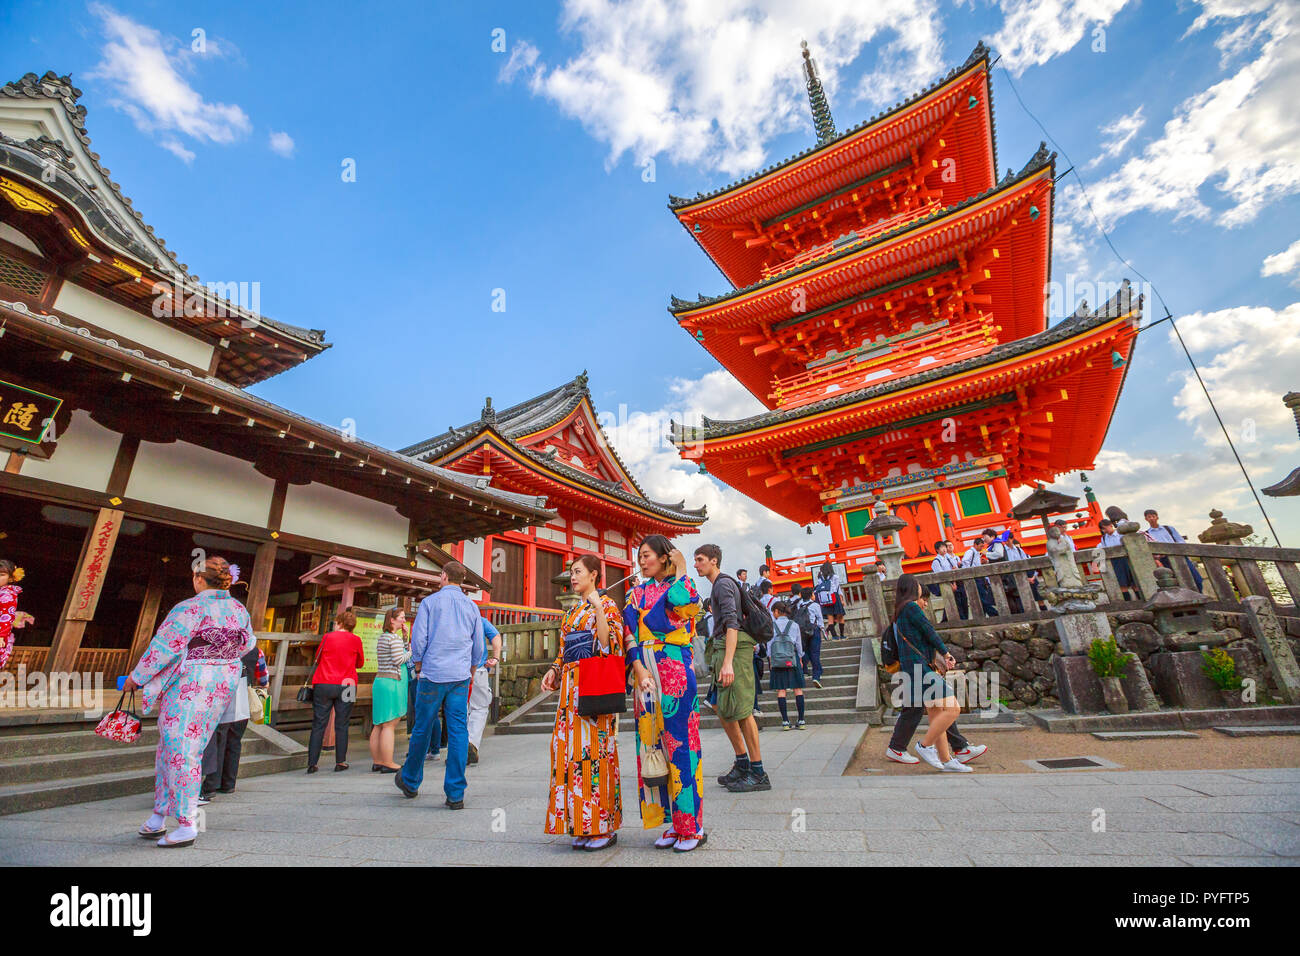 Kyoto, Japan - April 24, 2017: people and women in traditional japanese kimonos walking inside Kiyomizu-dera, Southern Higashiyama, one of the most celebrated temples of Japan. Unesco heritage Site. Stock Photo